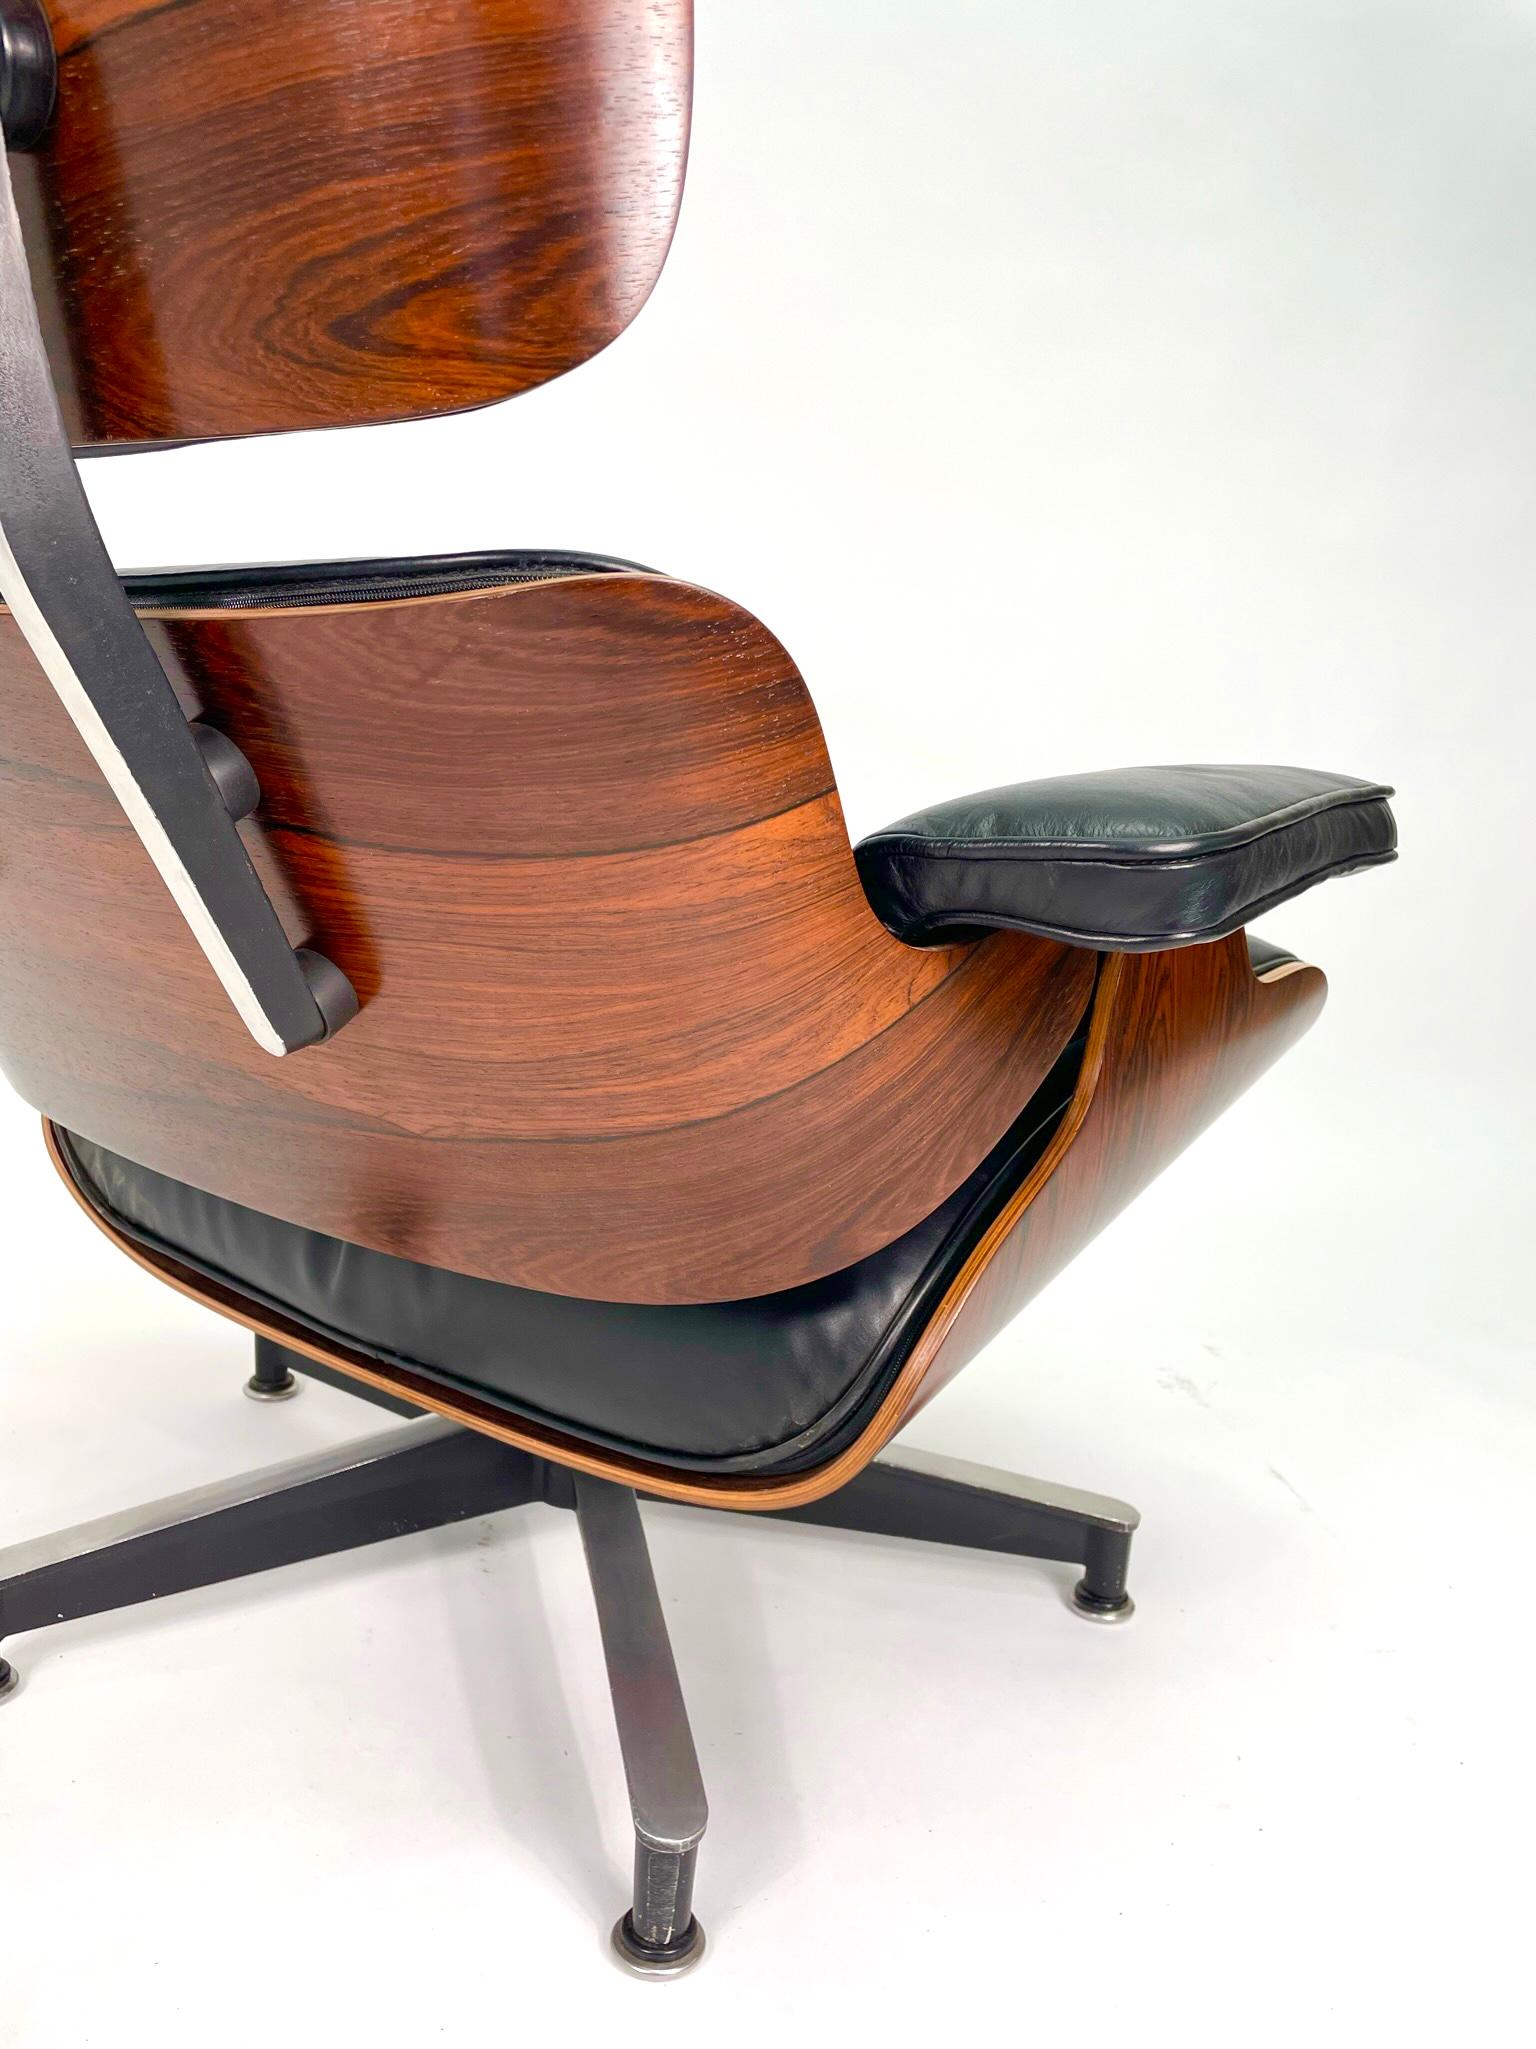 2nd Generation Eames Lounge Chair & Ottoman in Brazilian Rosewood 3